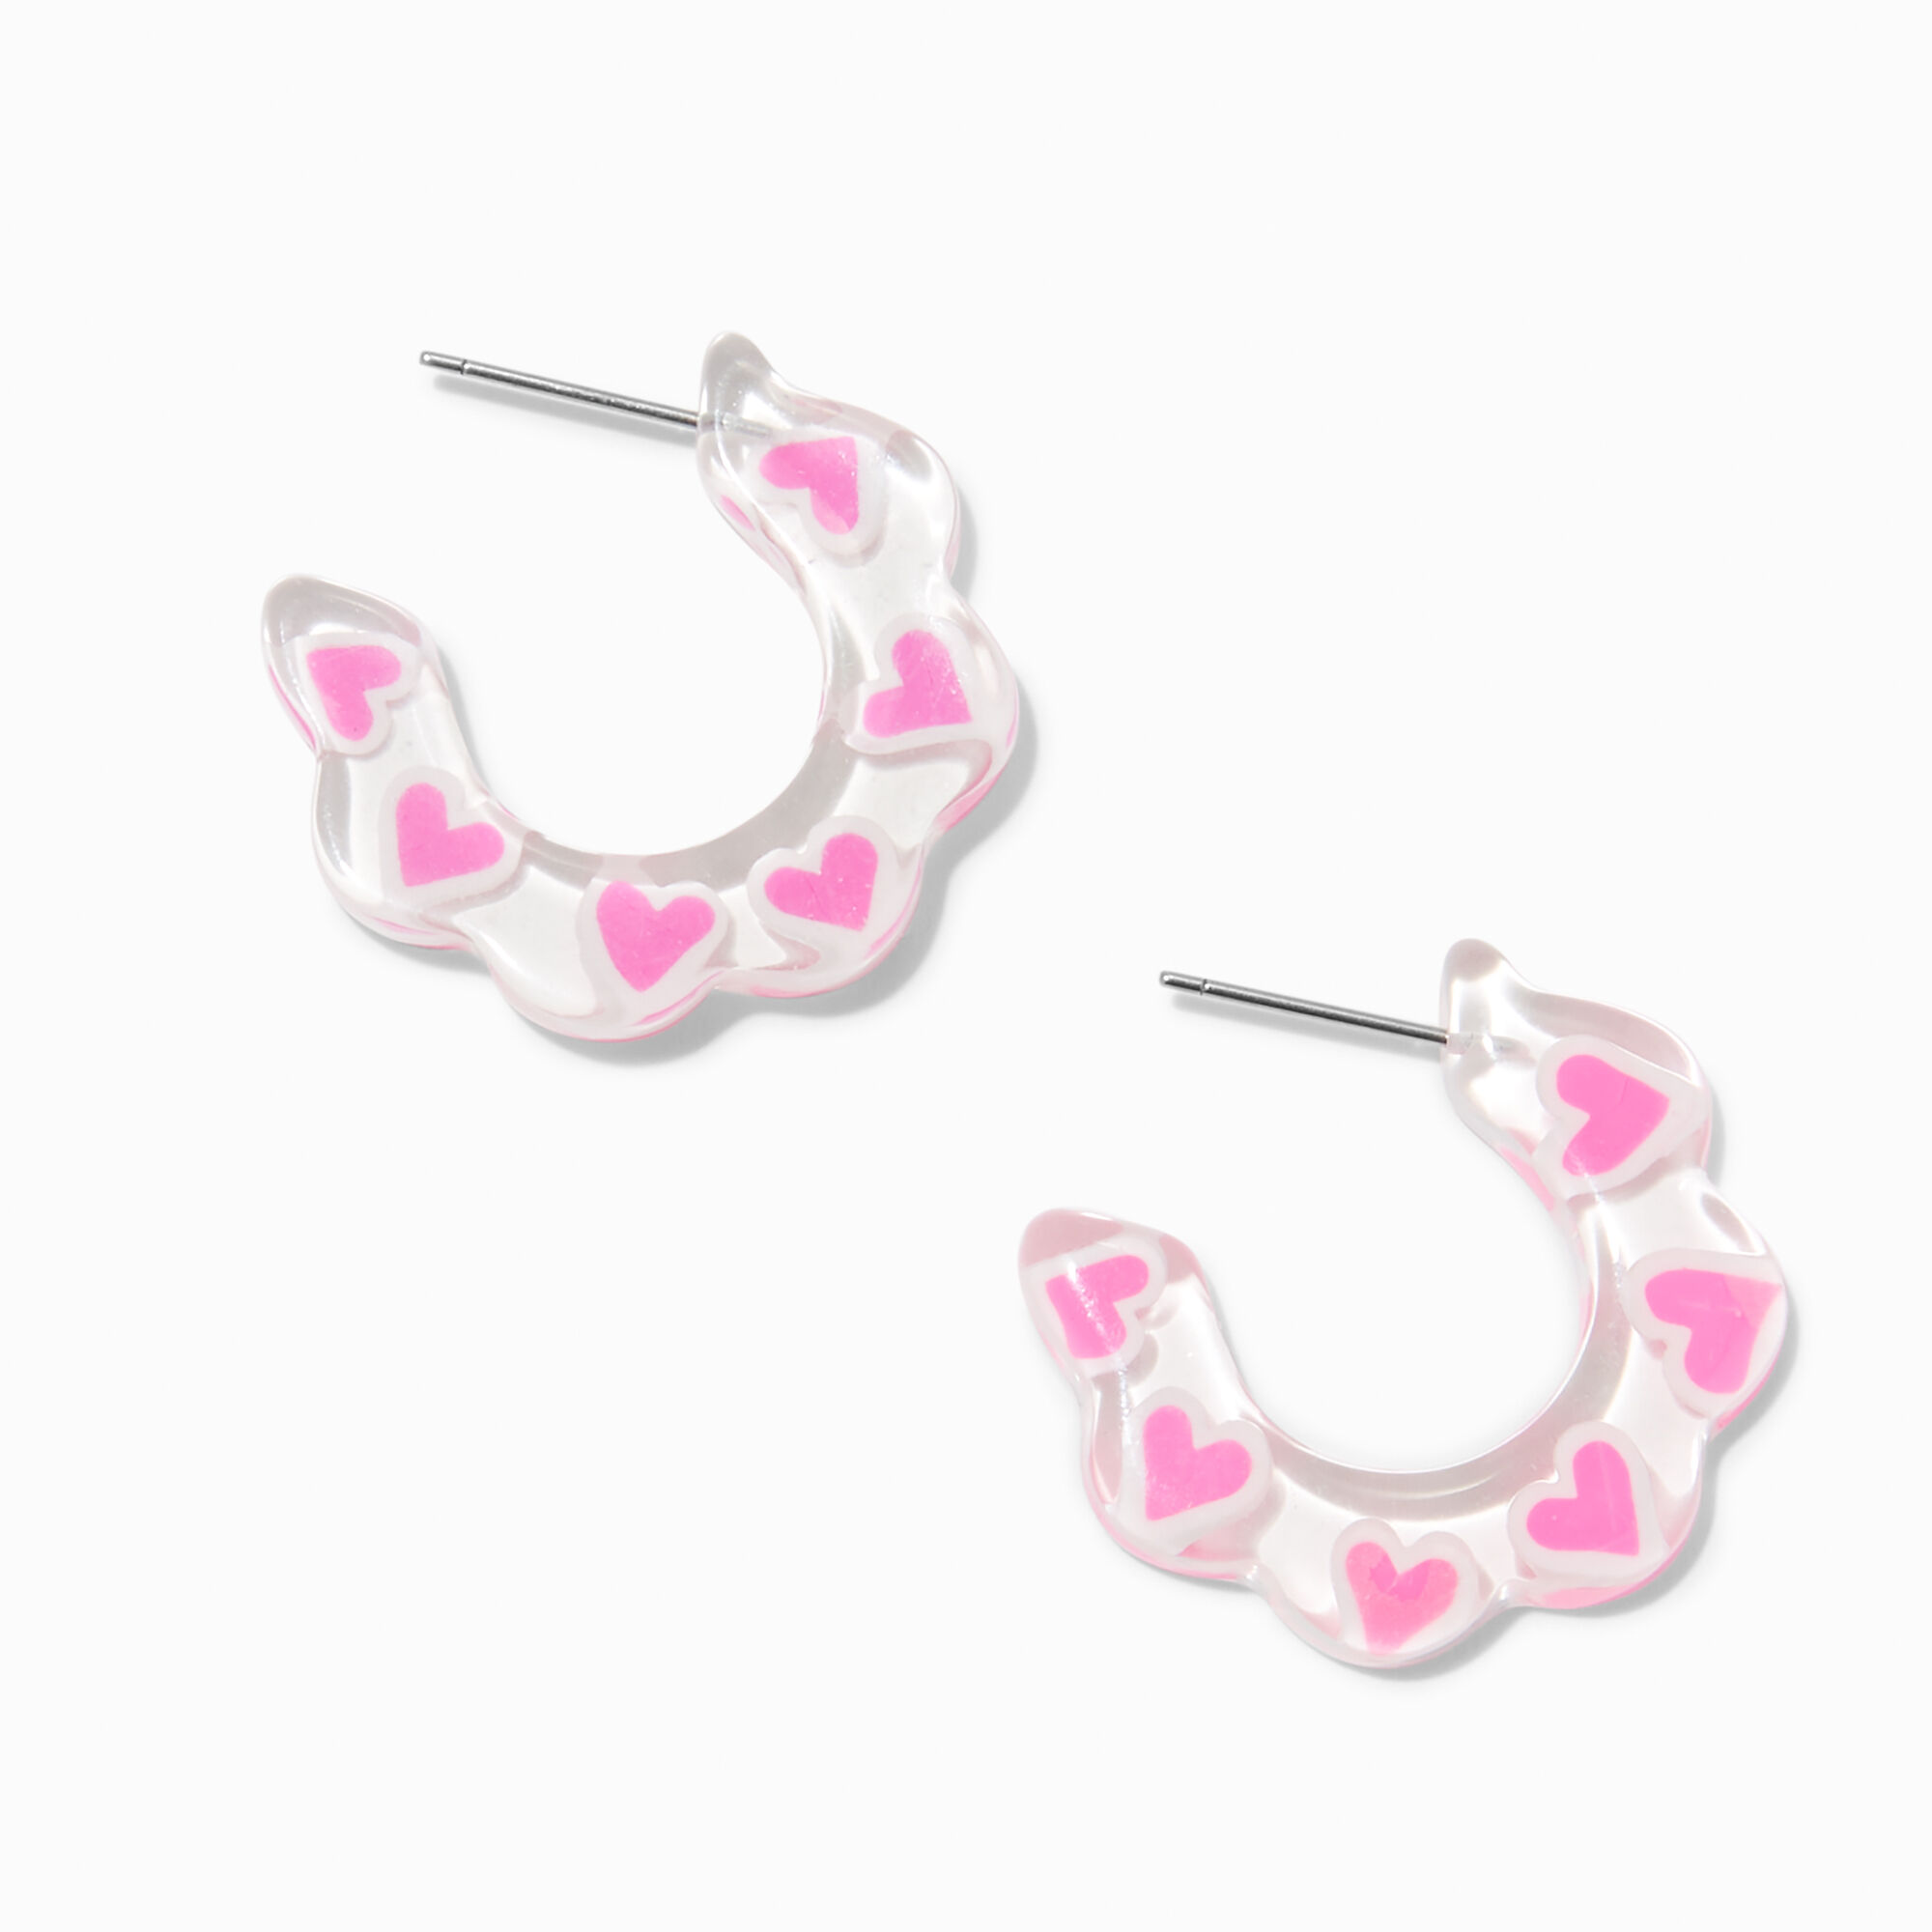 View Claires Hearts 30MM Resin Hoop Earrings Pink information